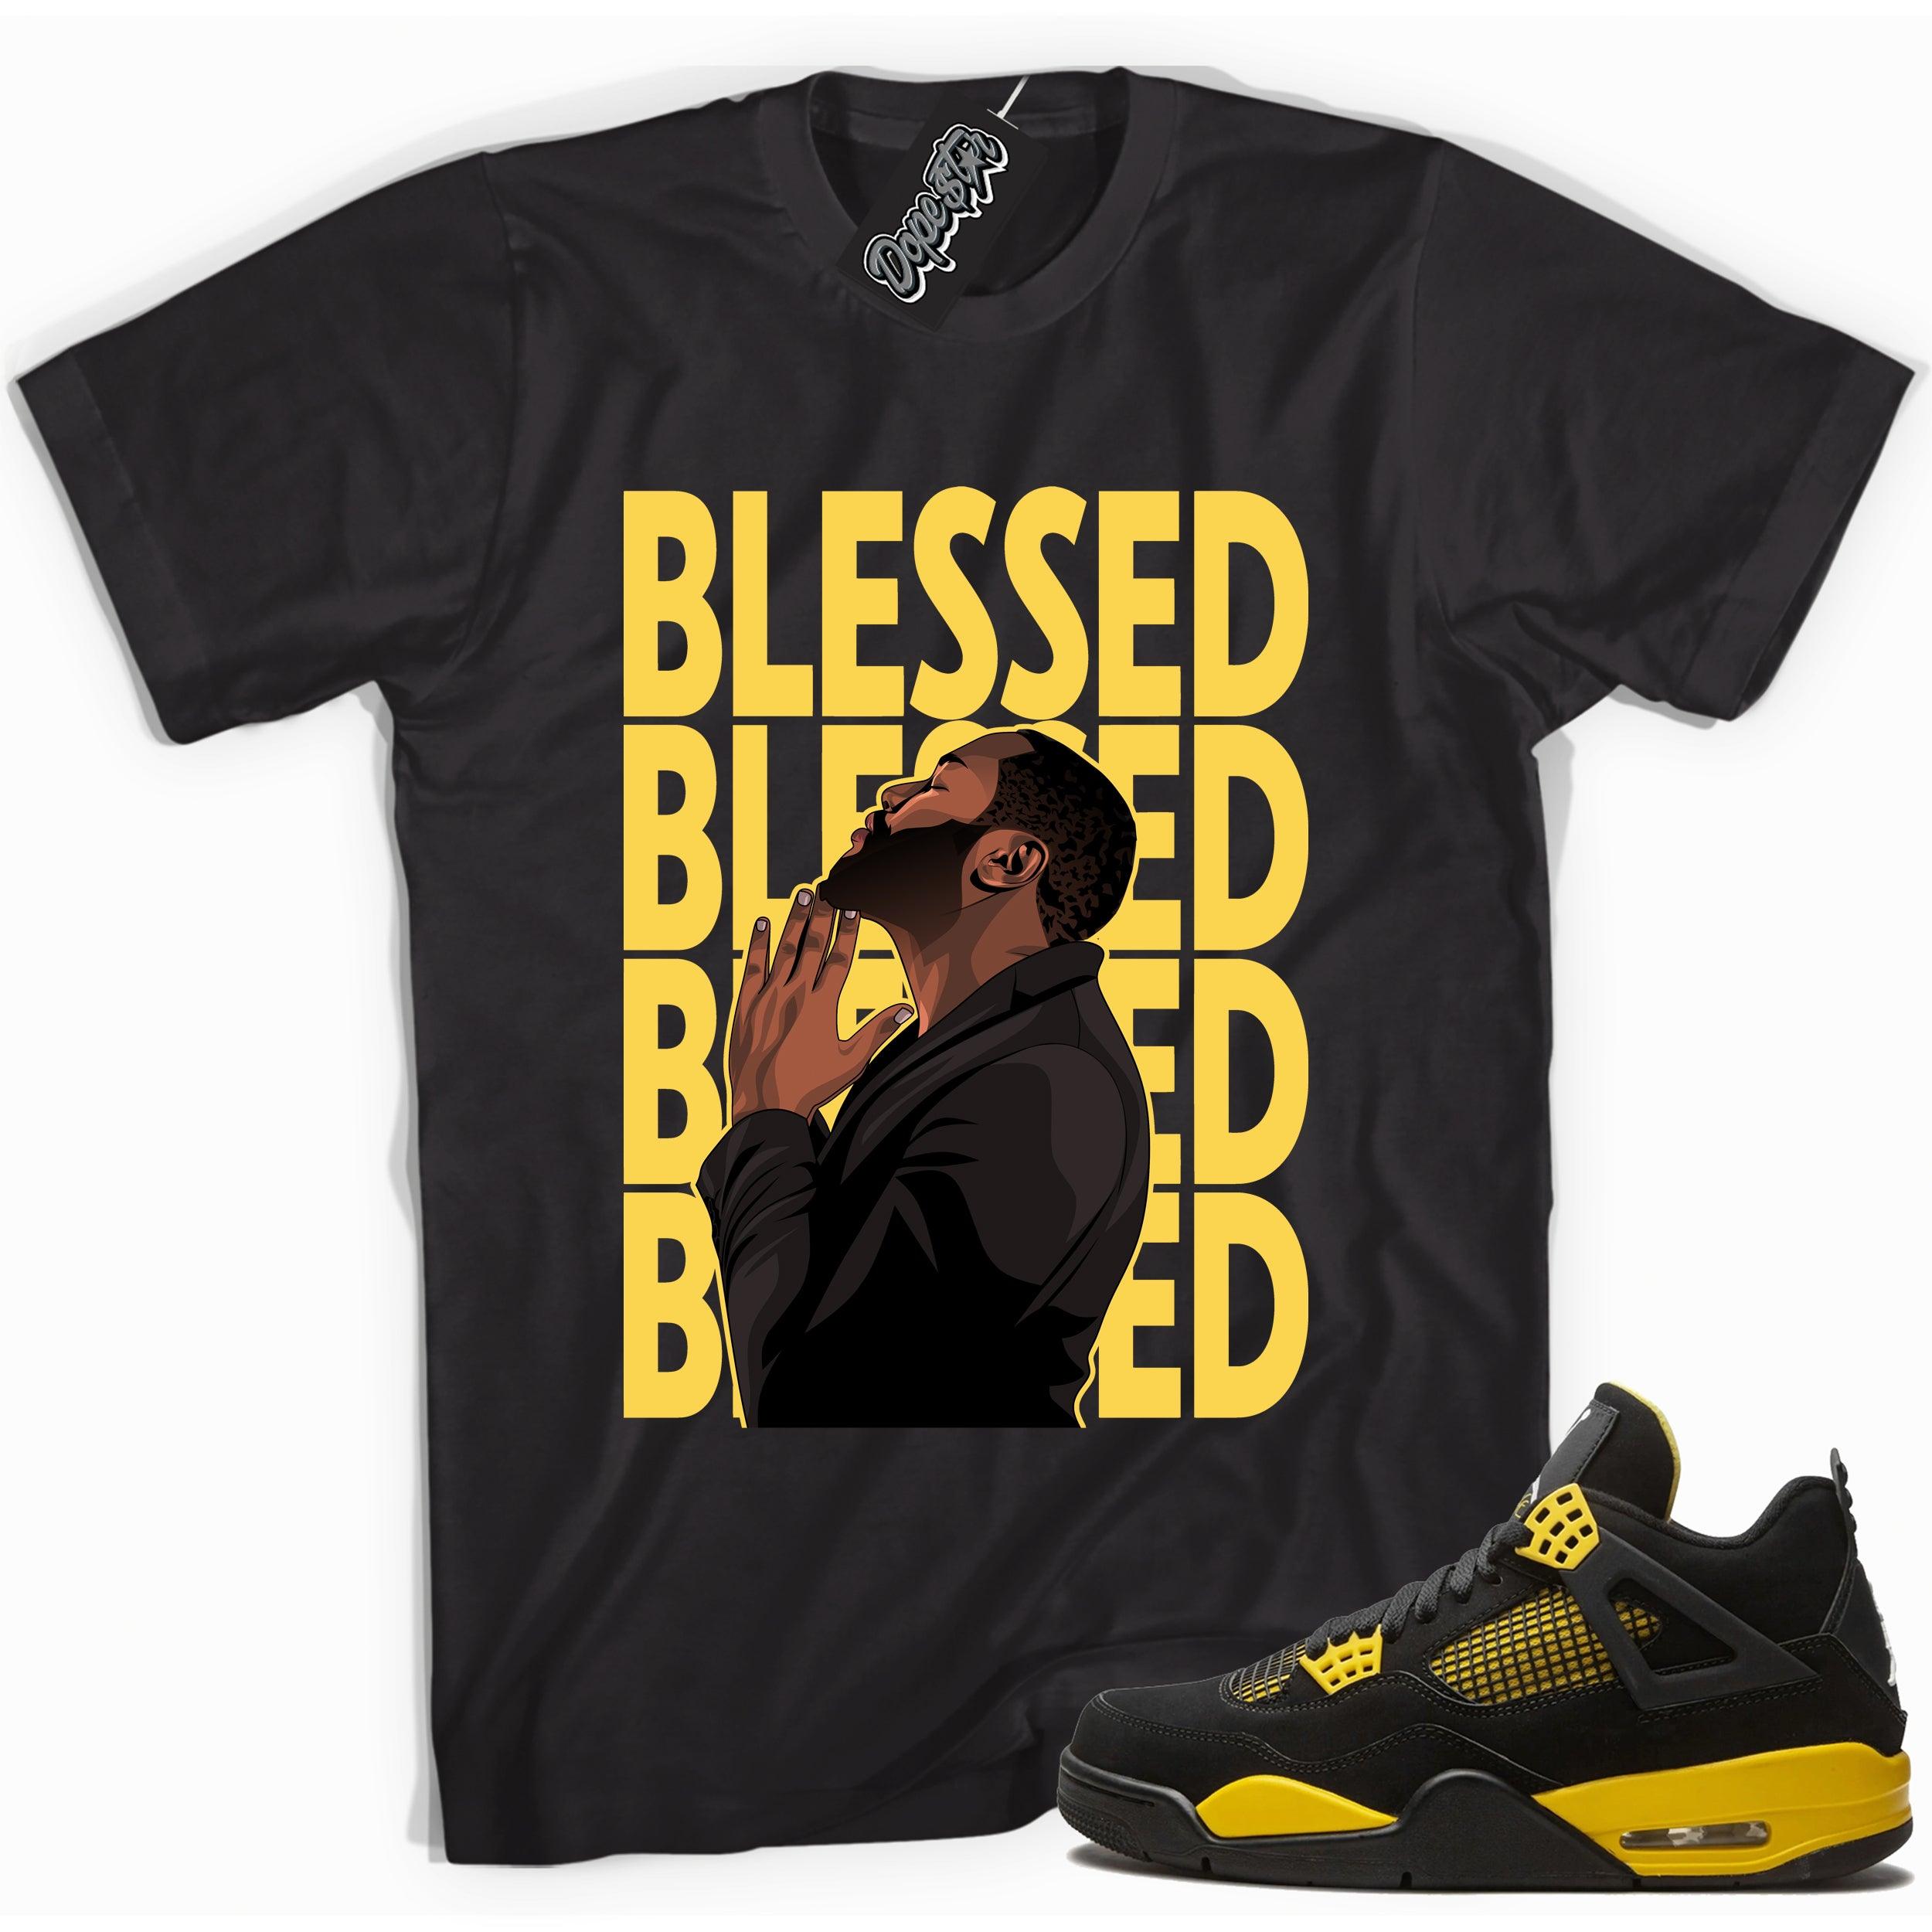 Cool black graphic tee with 'god blessed' print, that perfectly matches  Air Jordan 4 Thunder sneakers